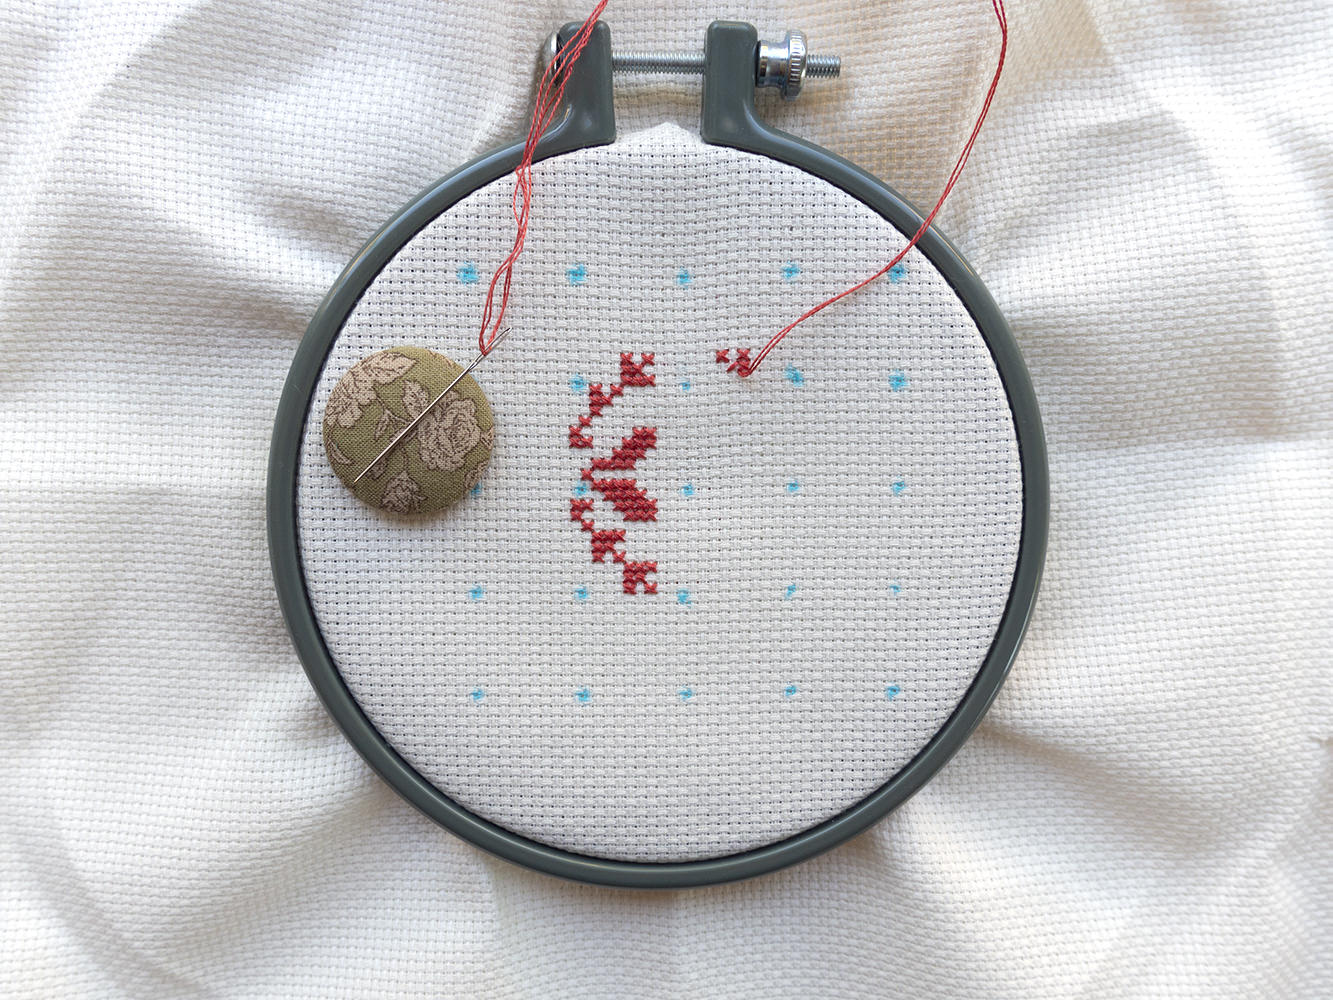 How to Frame a Cross Stitch Project: 3 Ways